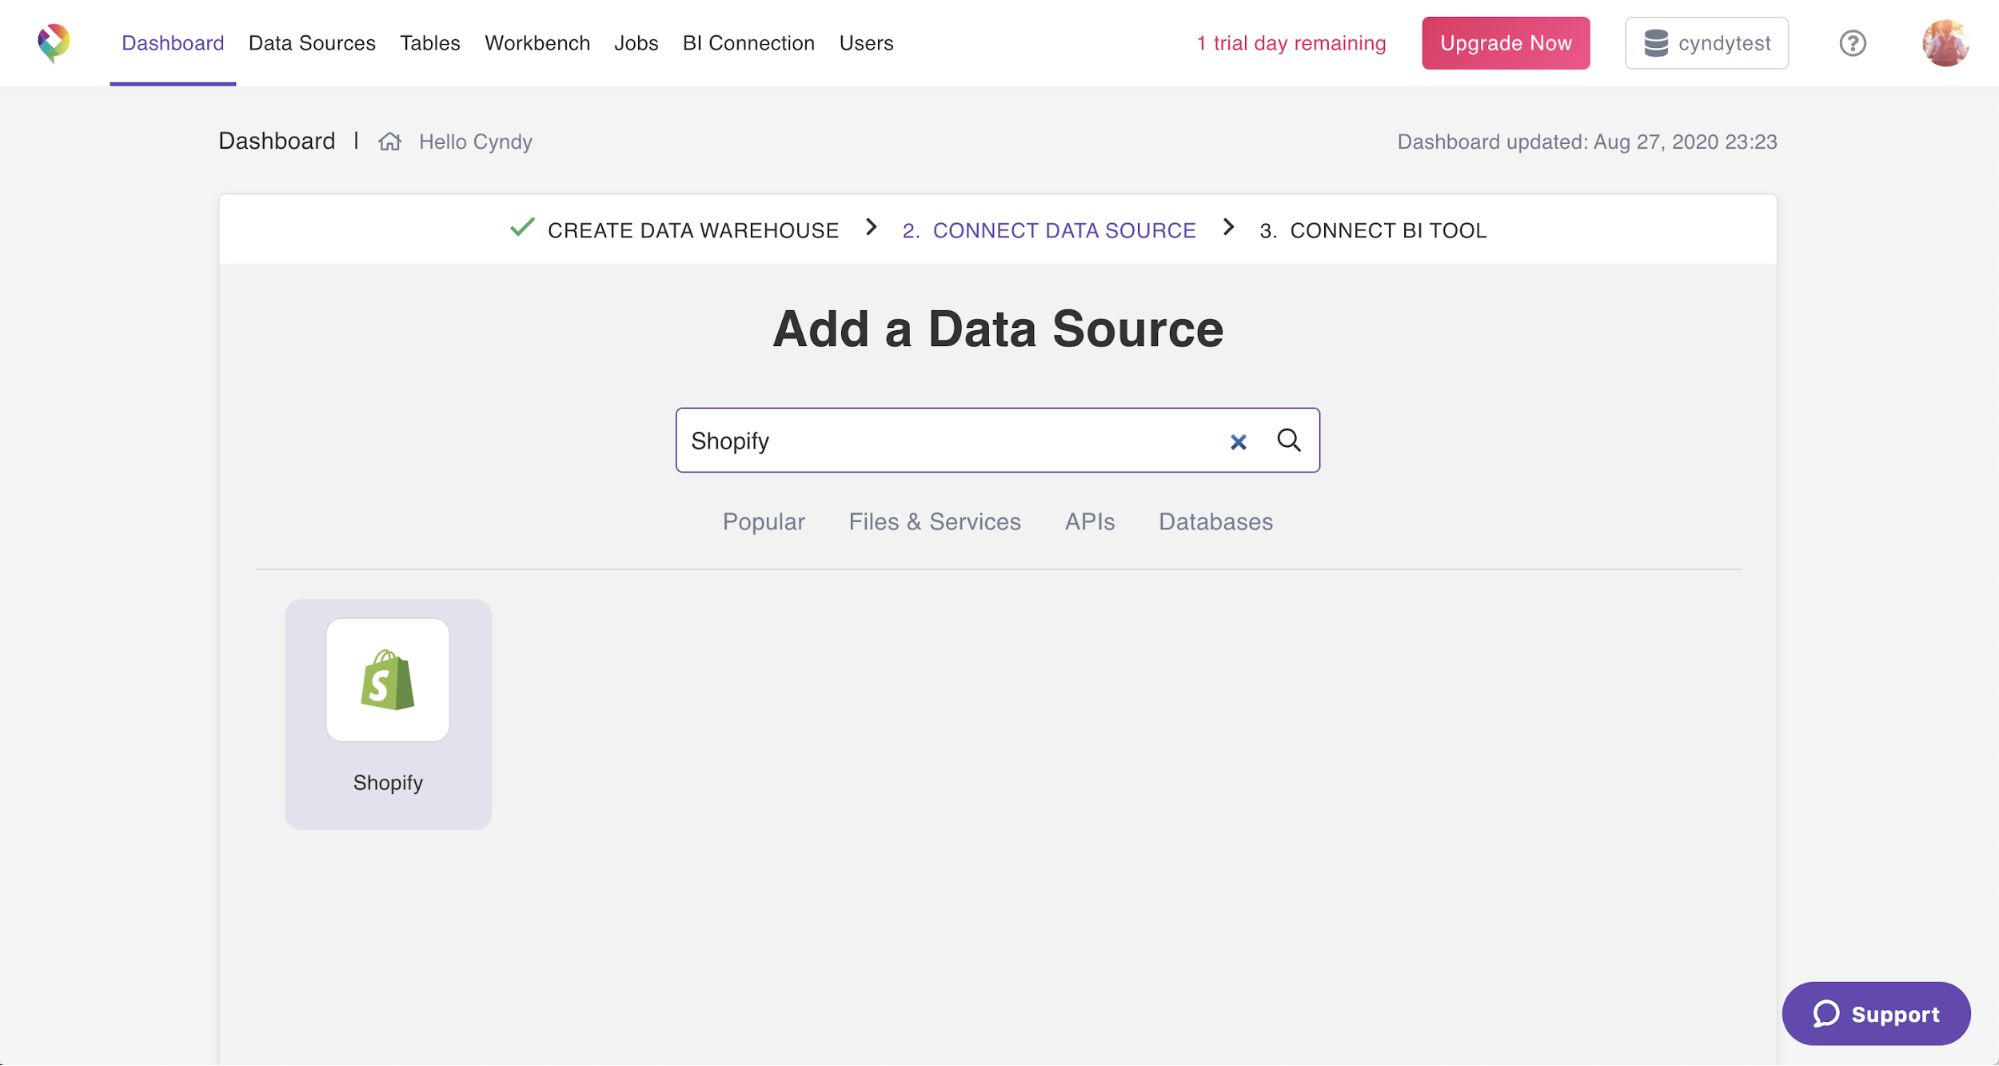 A screenshot of an easy-to-use UI for connecting Shopify data to a data warehouse.